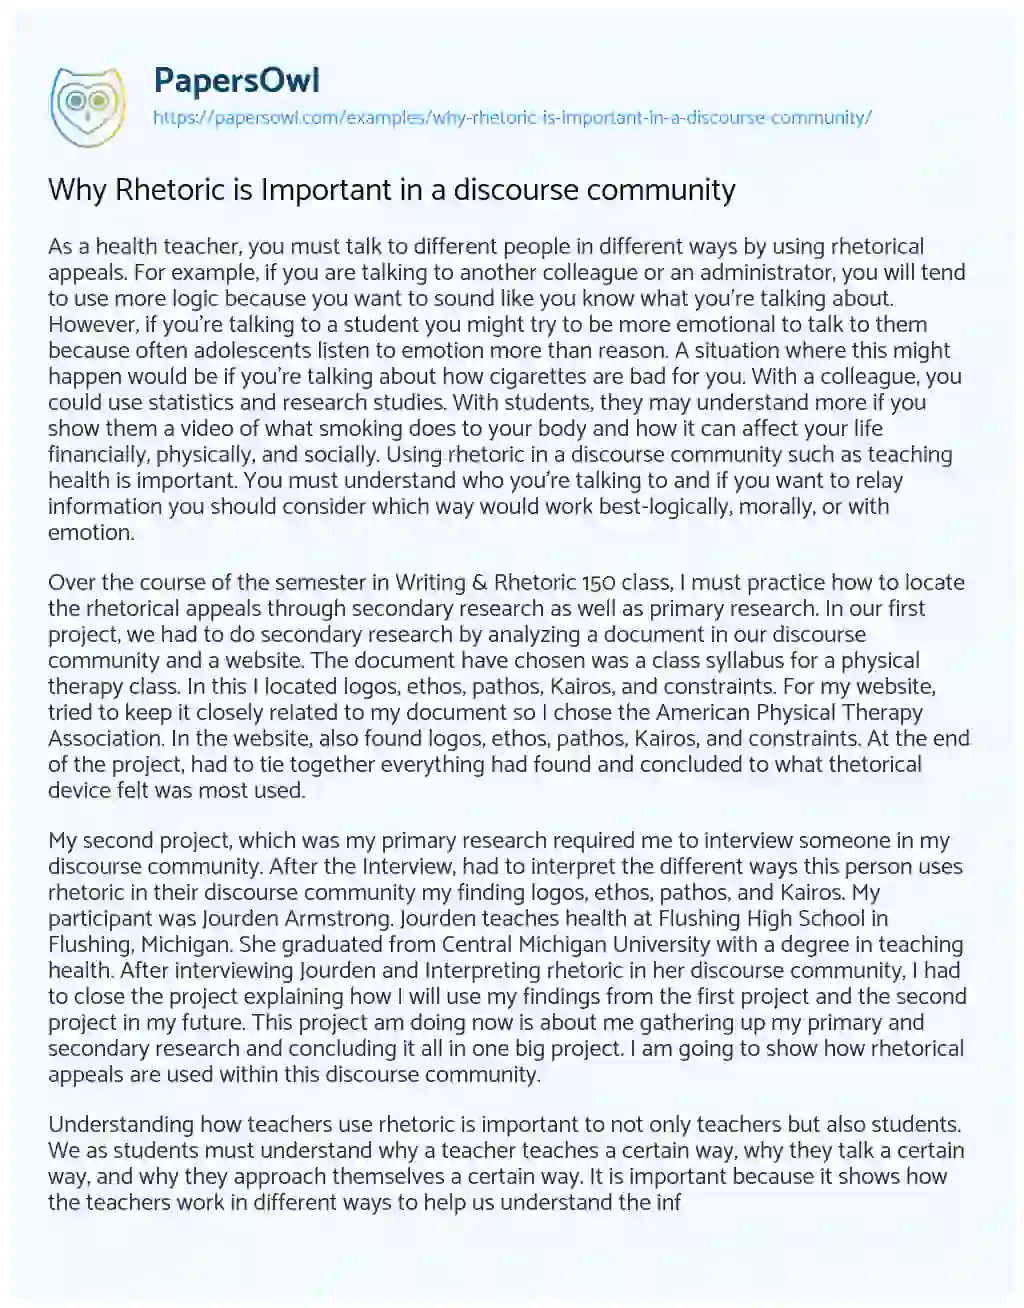 Essay on Why Rhetoric is Important in a Discourse Community